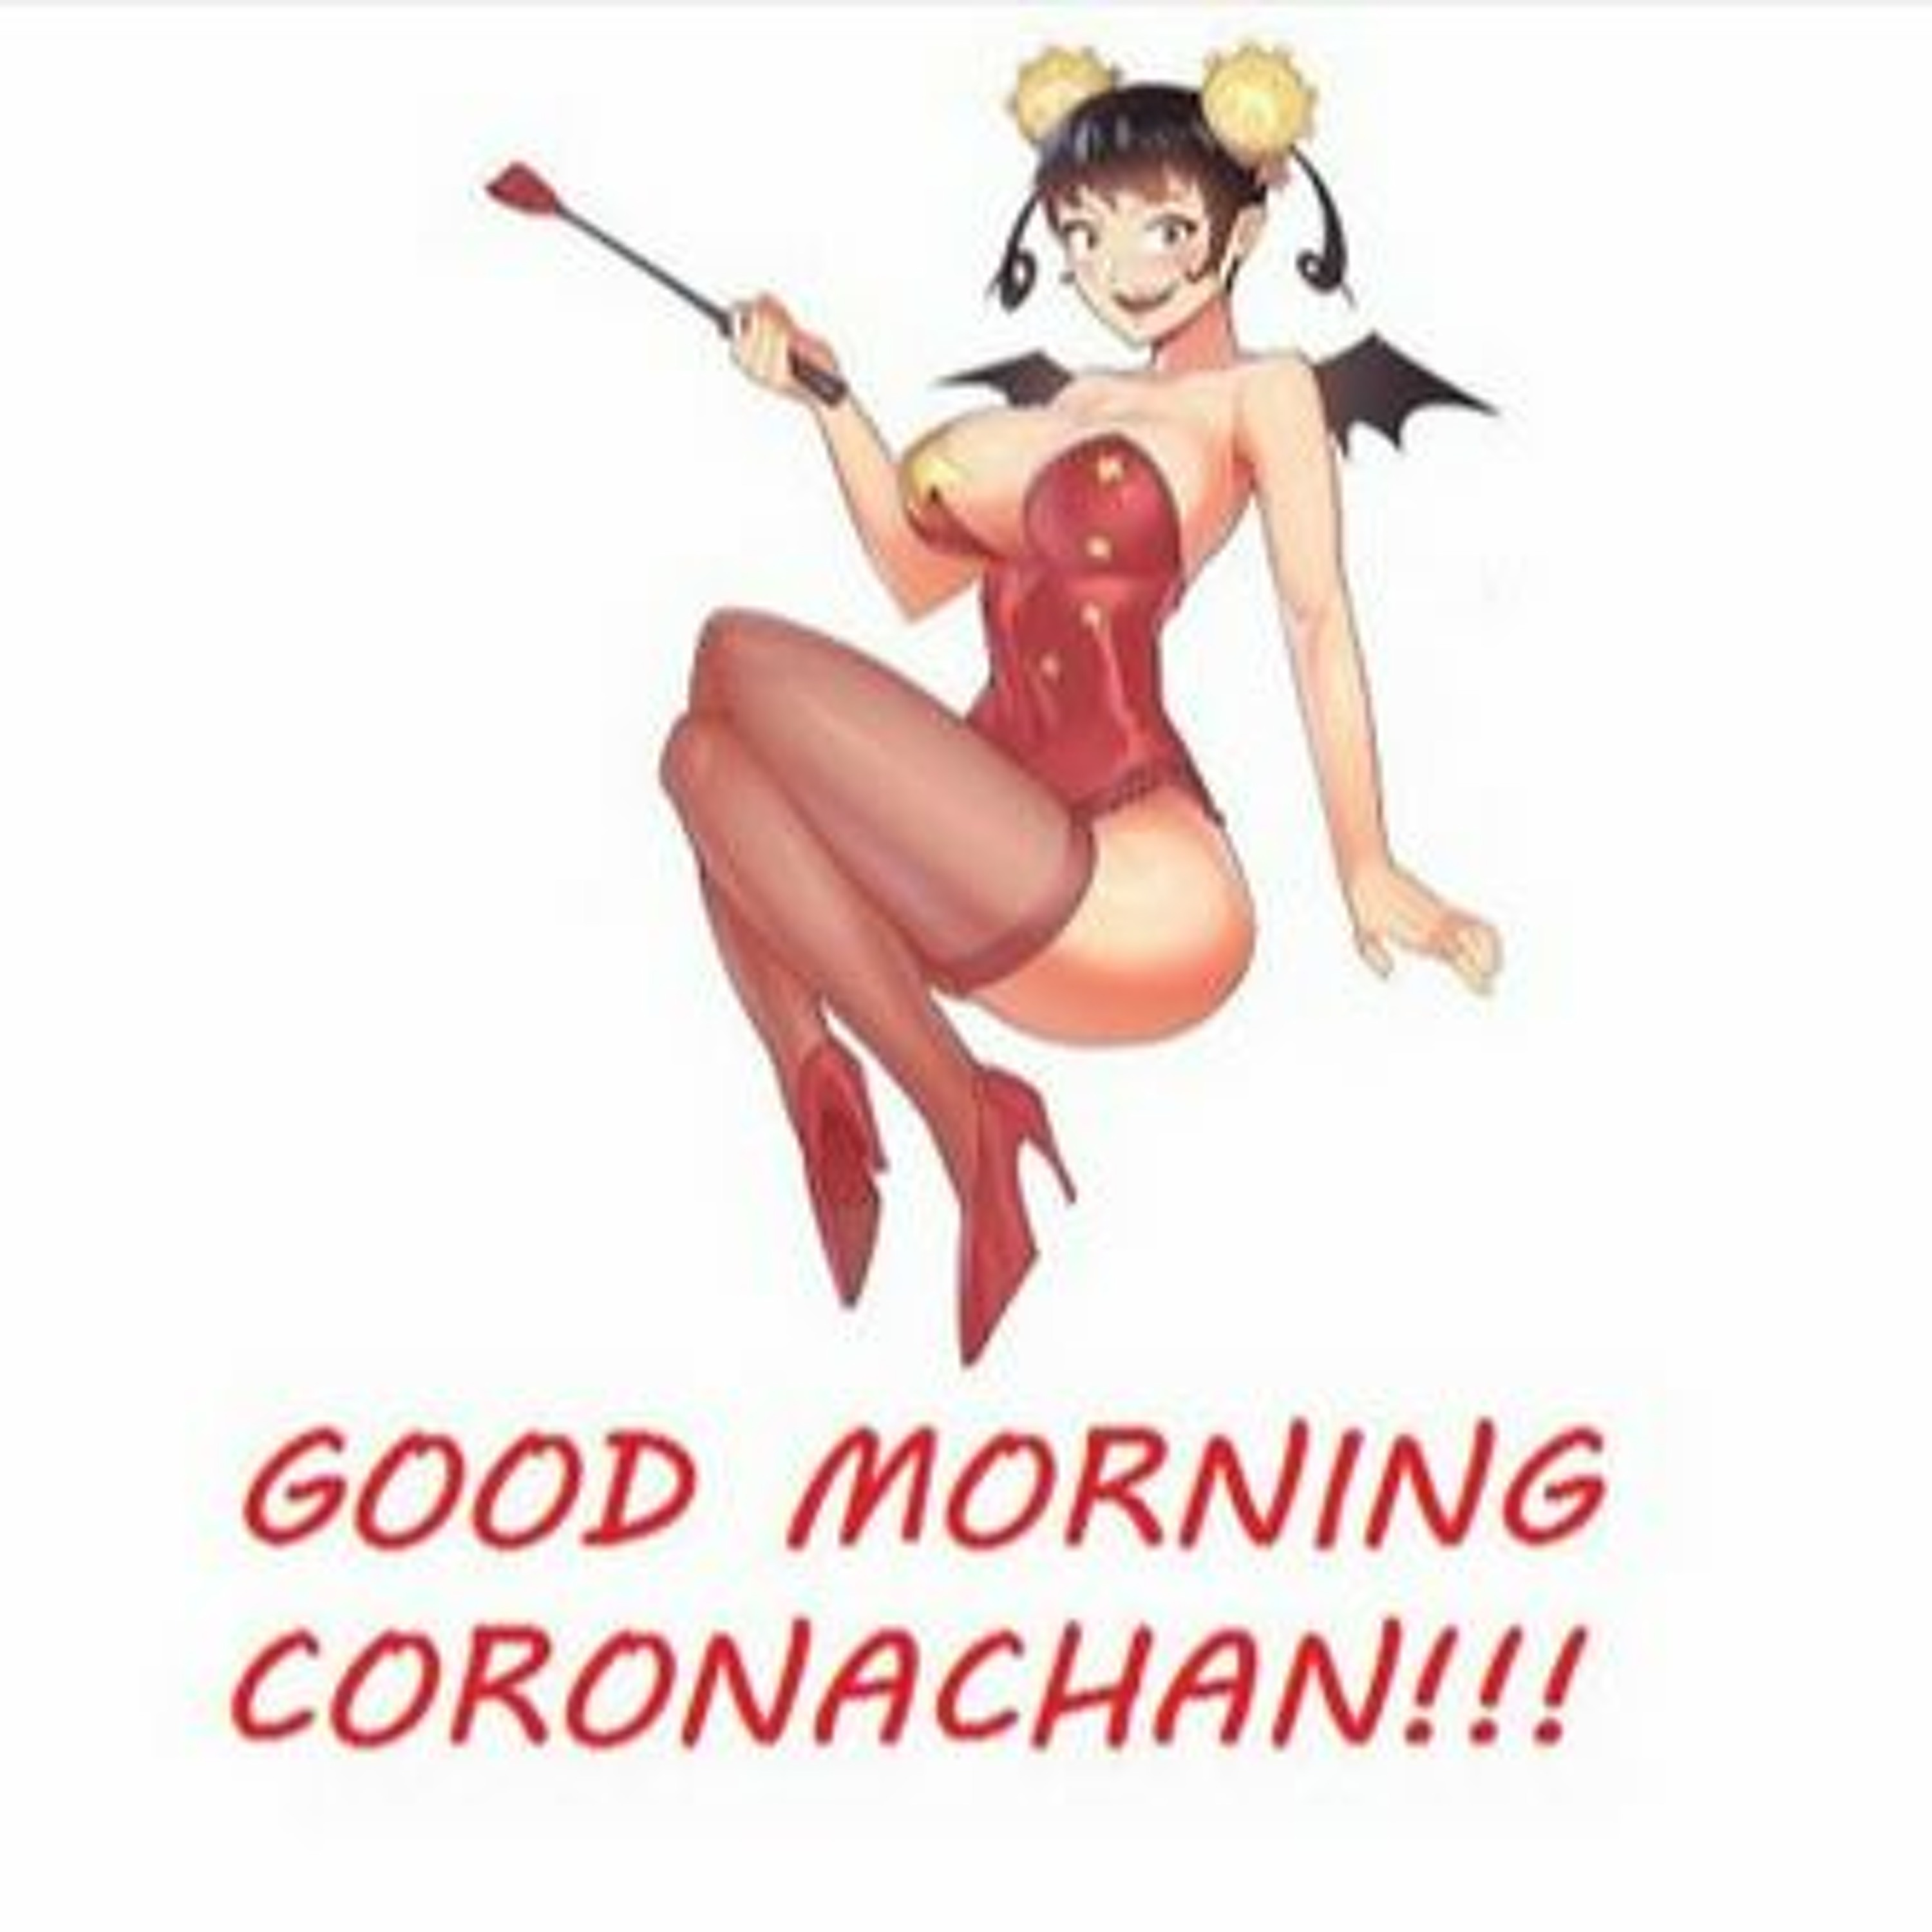 Good Morning Coronachan - ”Consequences Of An All Democrat Labor Force” Episode